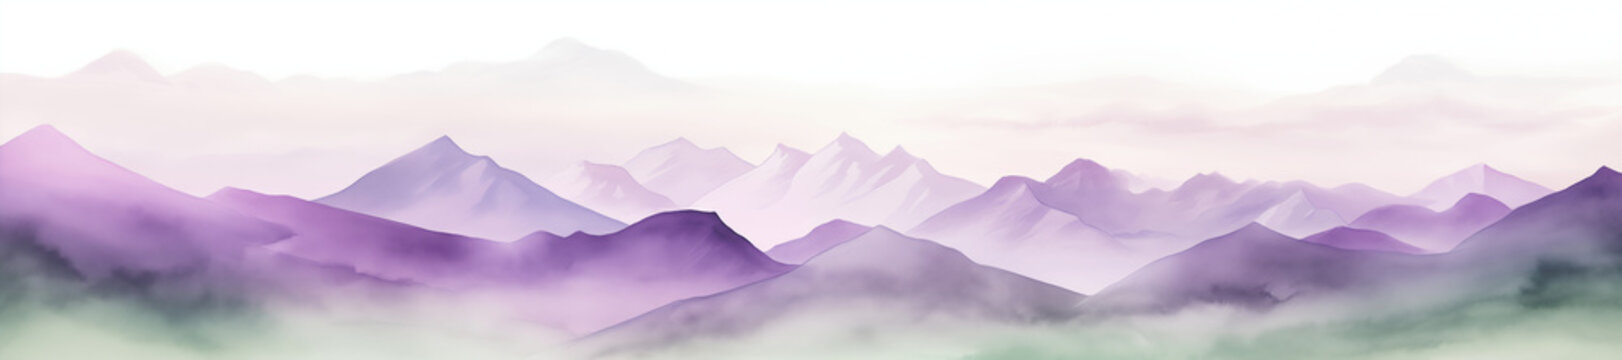 Watercolor mountain landscape with pale purple and green colors. Minimalistic style. Banner image.	
